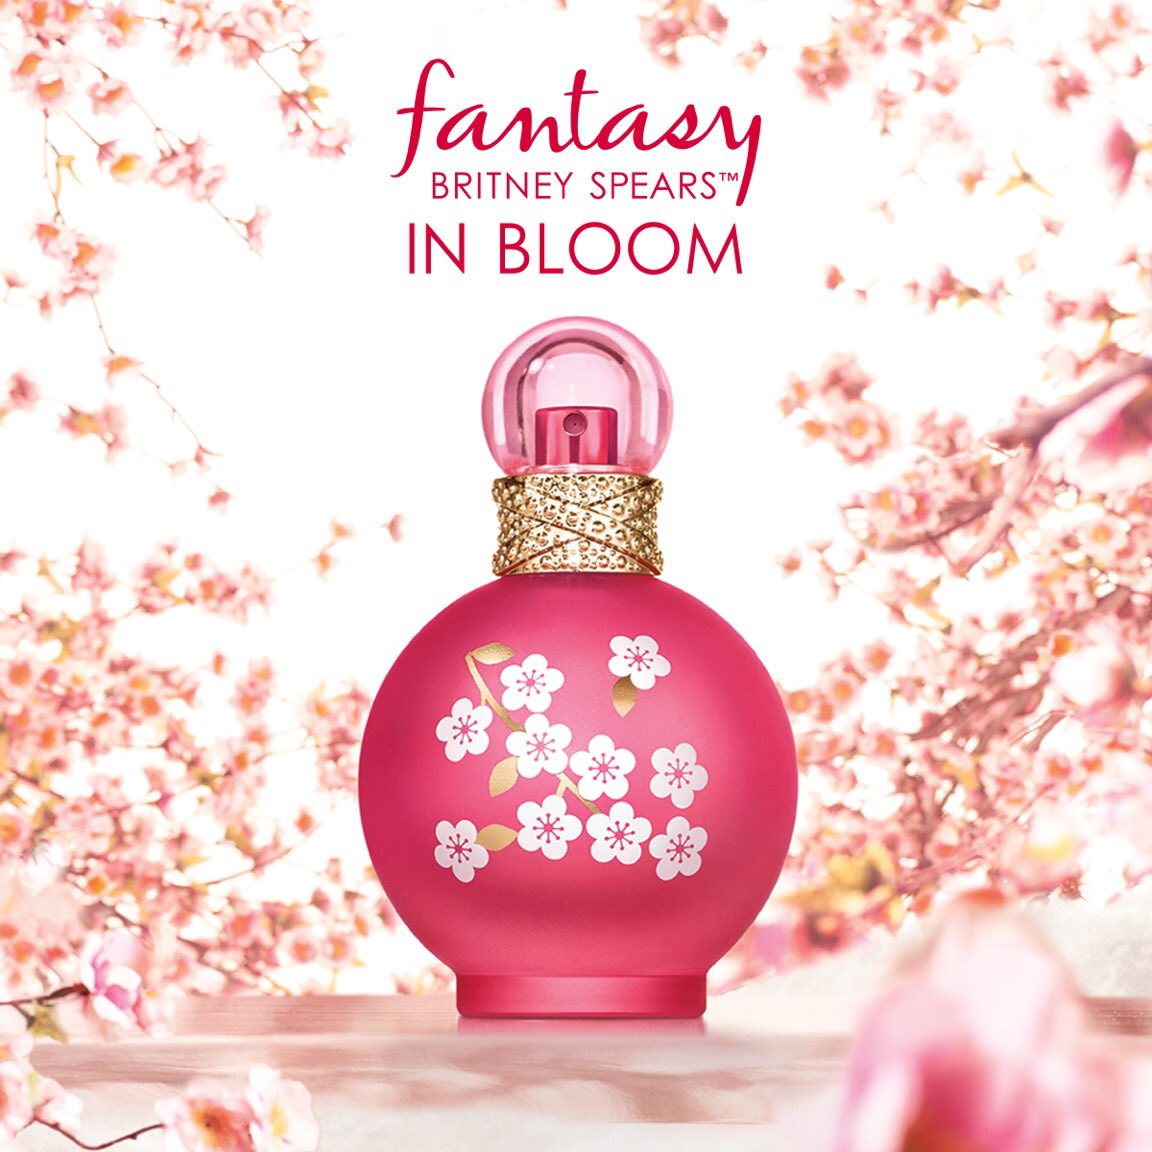 Excited to introduce my new floral fragrance, #FantasyInBloom! Available now at @Kohls in the US and soon worldwide. https://t.co/kSR1tAd85m